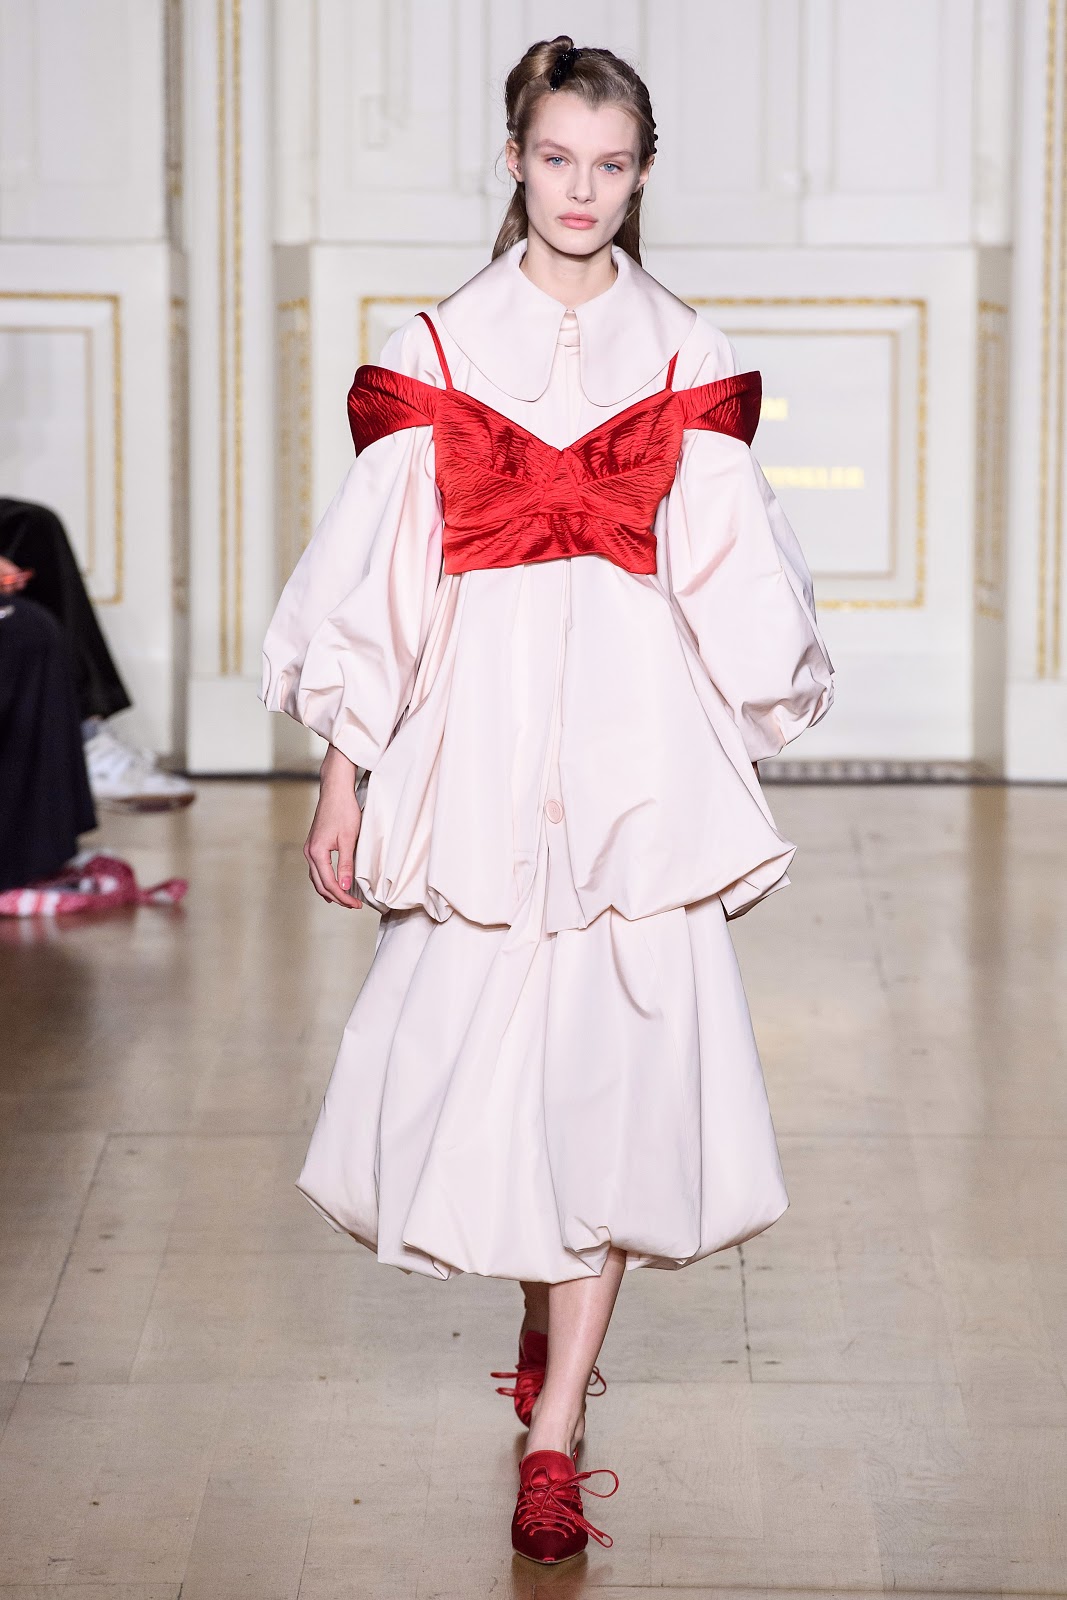 Simone Rocha Fall 2019 Ready-to-Wear Collection | Cool Chic Style Fashion